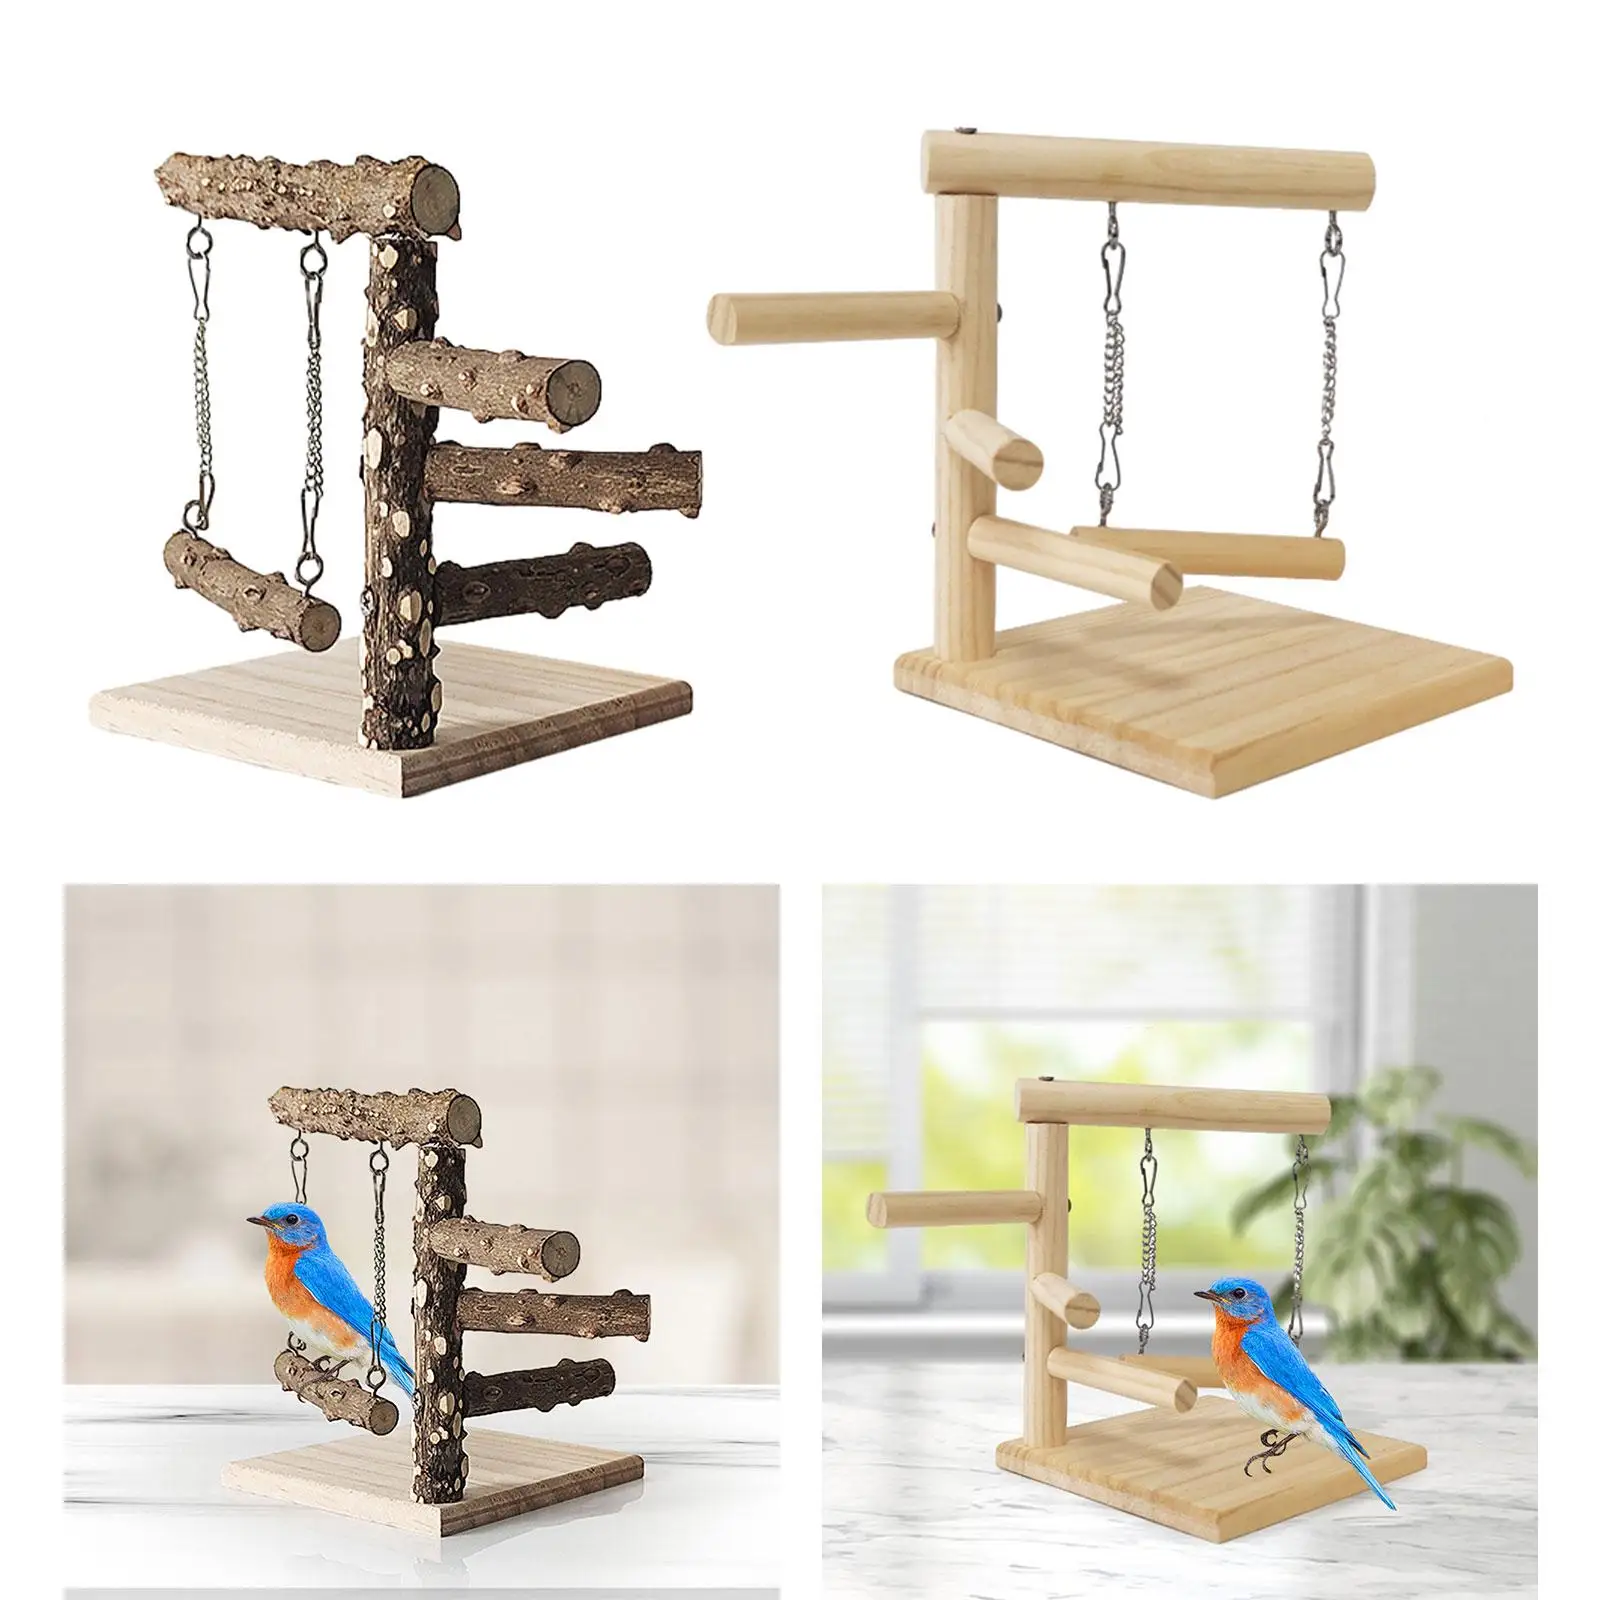 Wood Birds Cage Toys Gym Playground Bird Tabletop Training Perch Play Stand for Parrots Parakeets Cockatiels Canaries